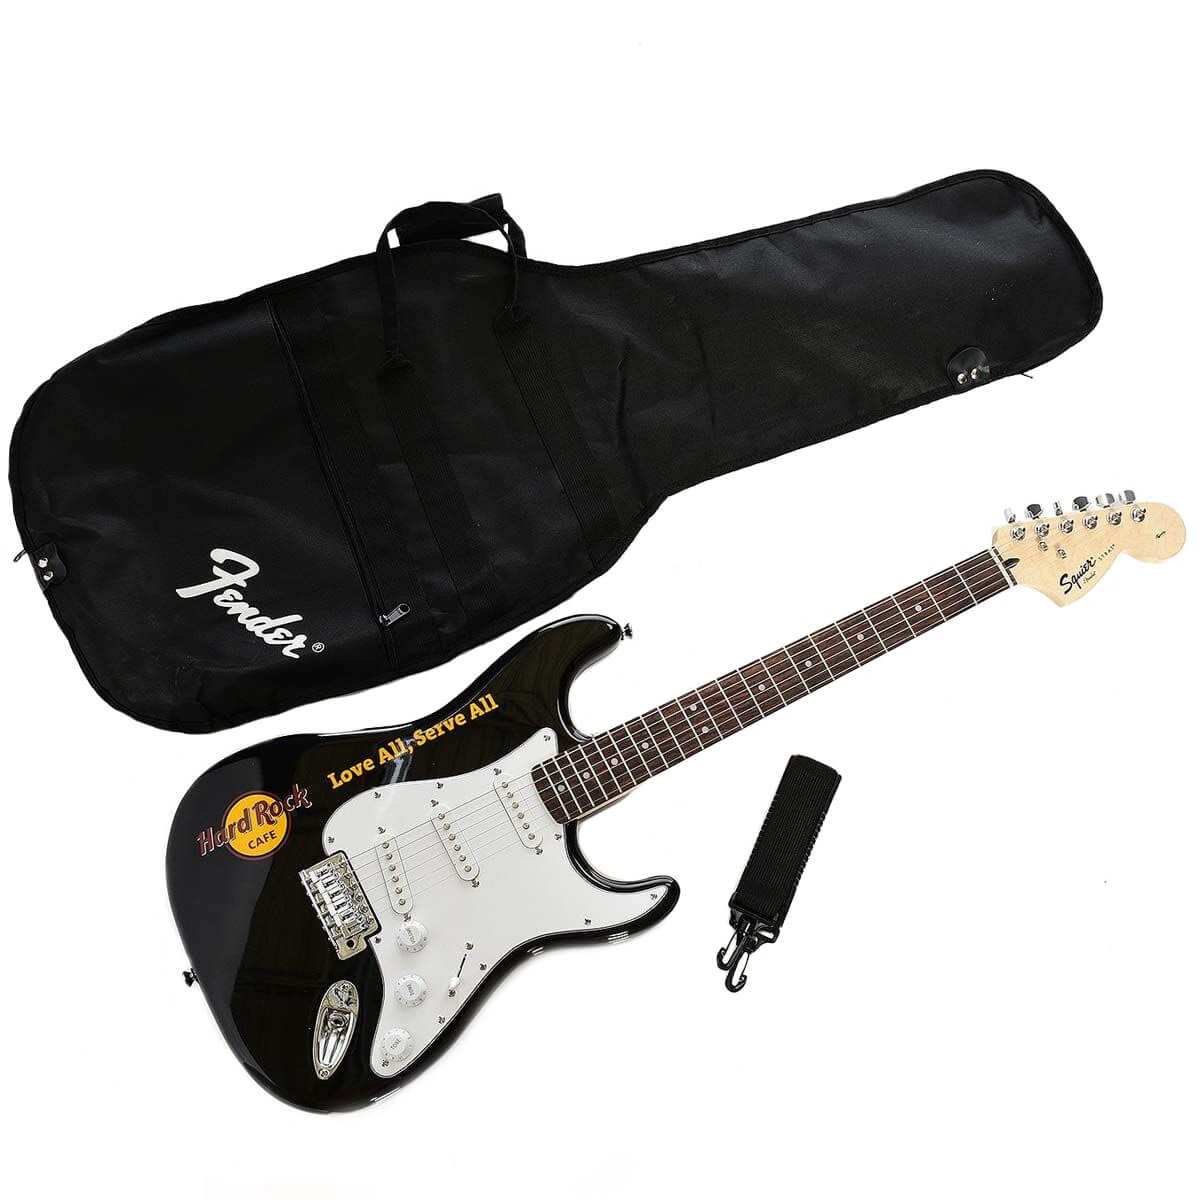 Fender Squier Stratocaster Electric Guitar with Hard Rock Logo in Black image number 3